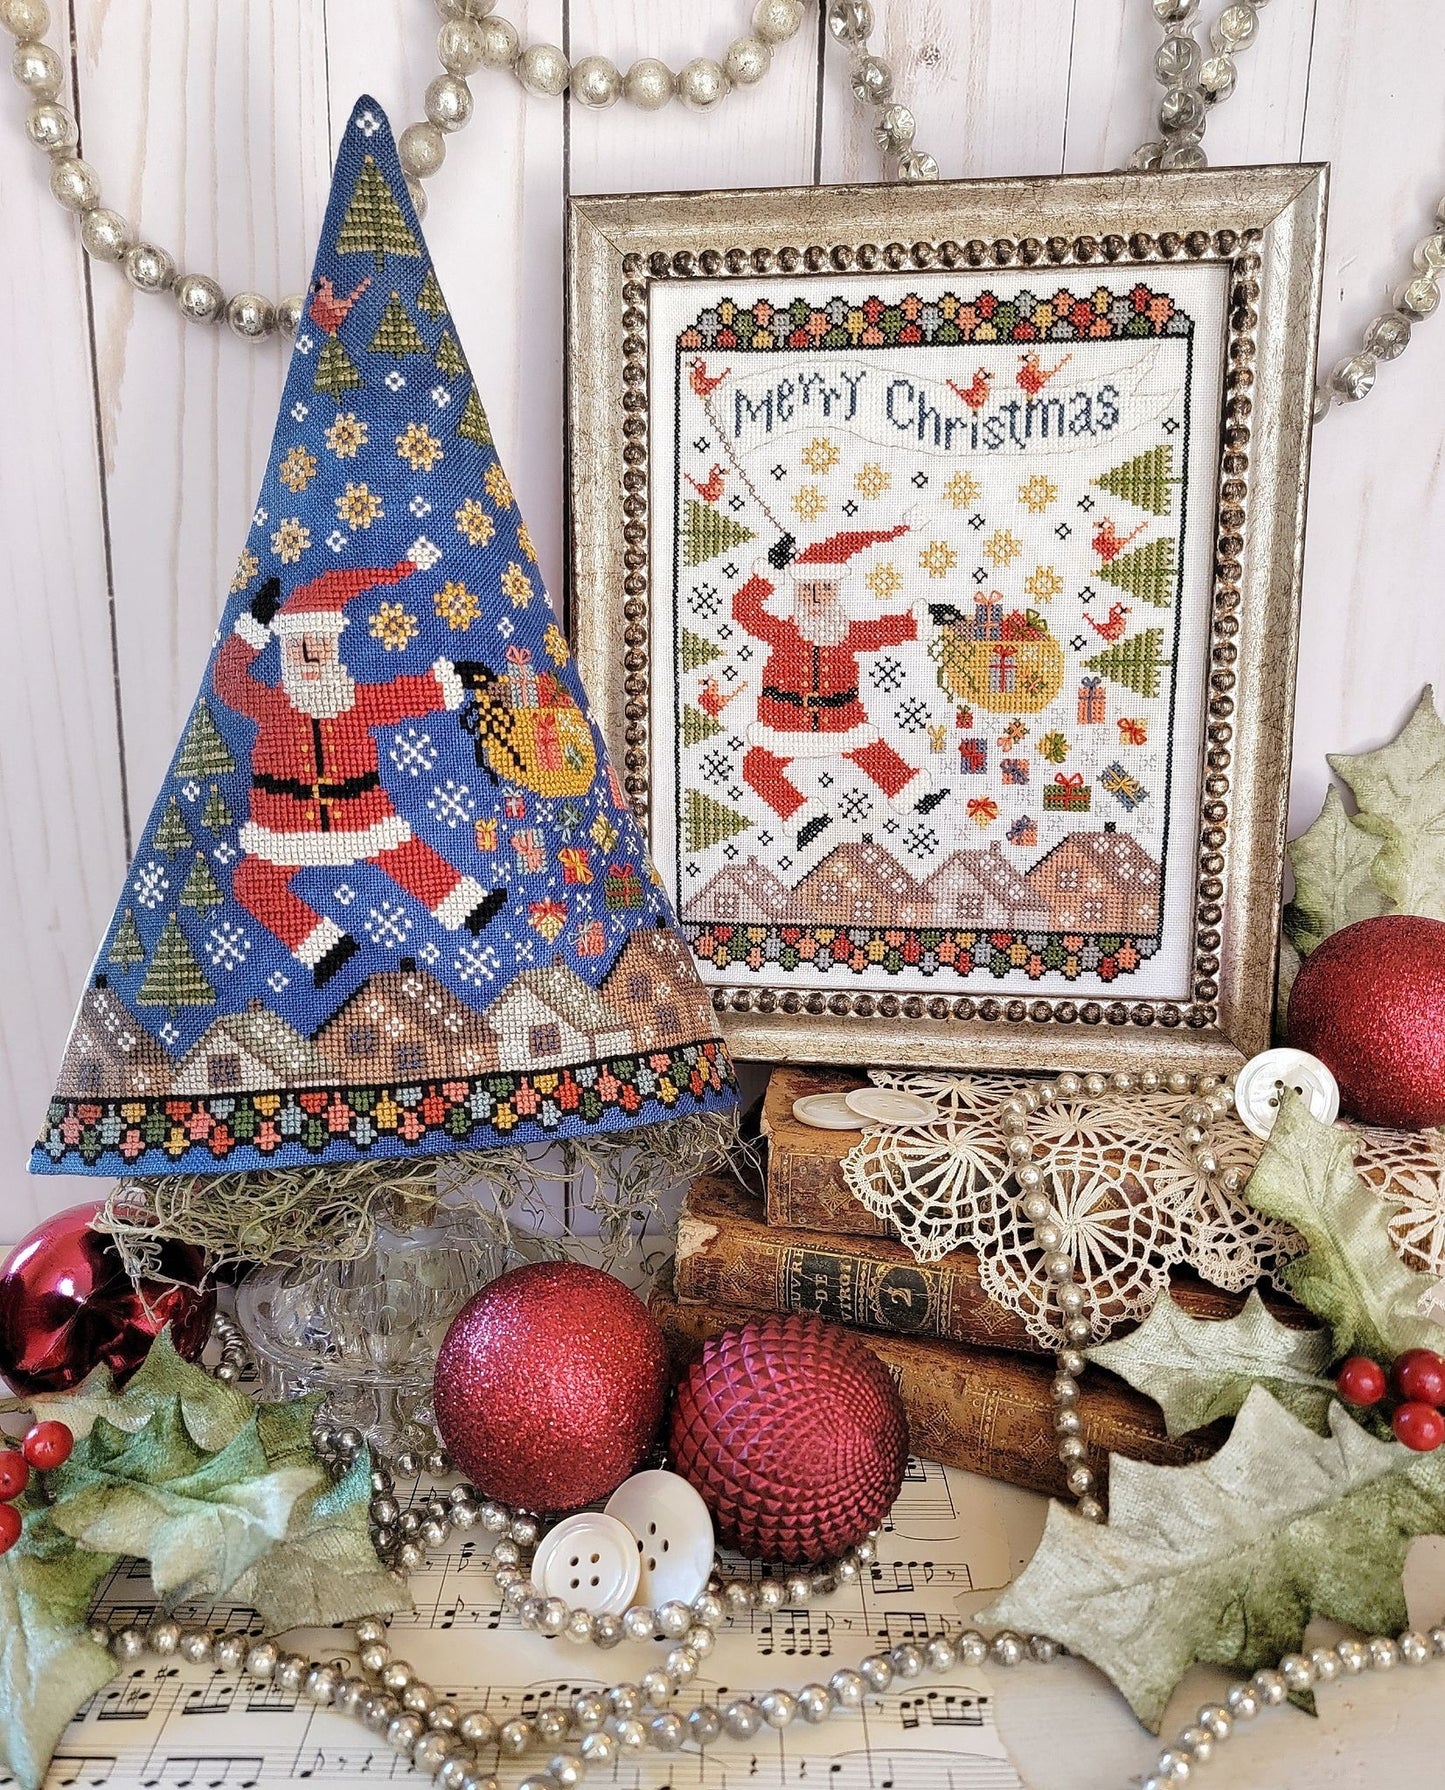 Tenth Day of Christmas Sampler and Tree - Cross Stitch Chart by Hello from Liz Mathews PREORDER